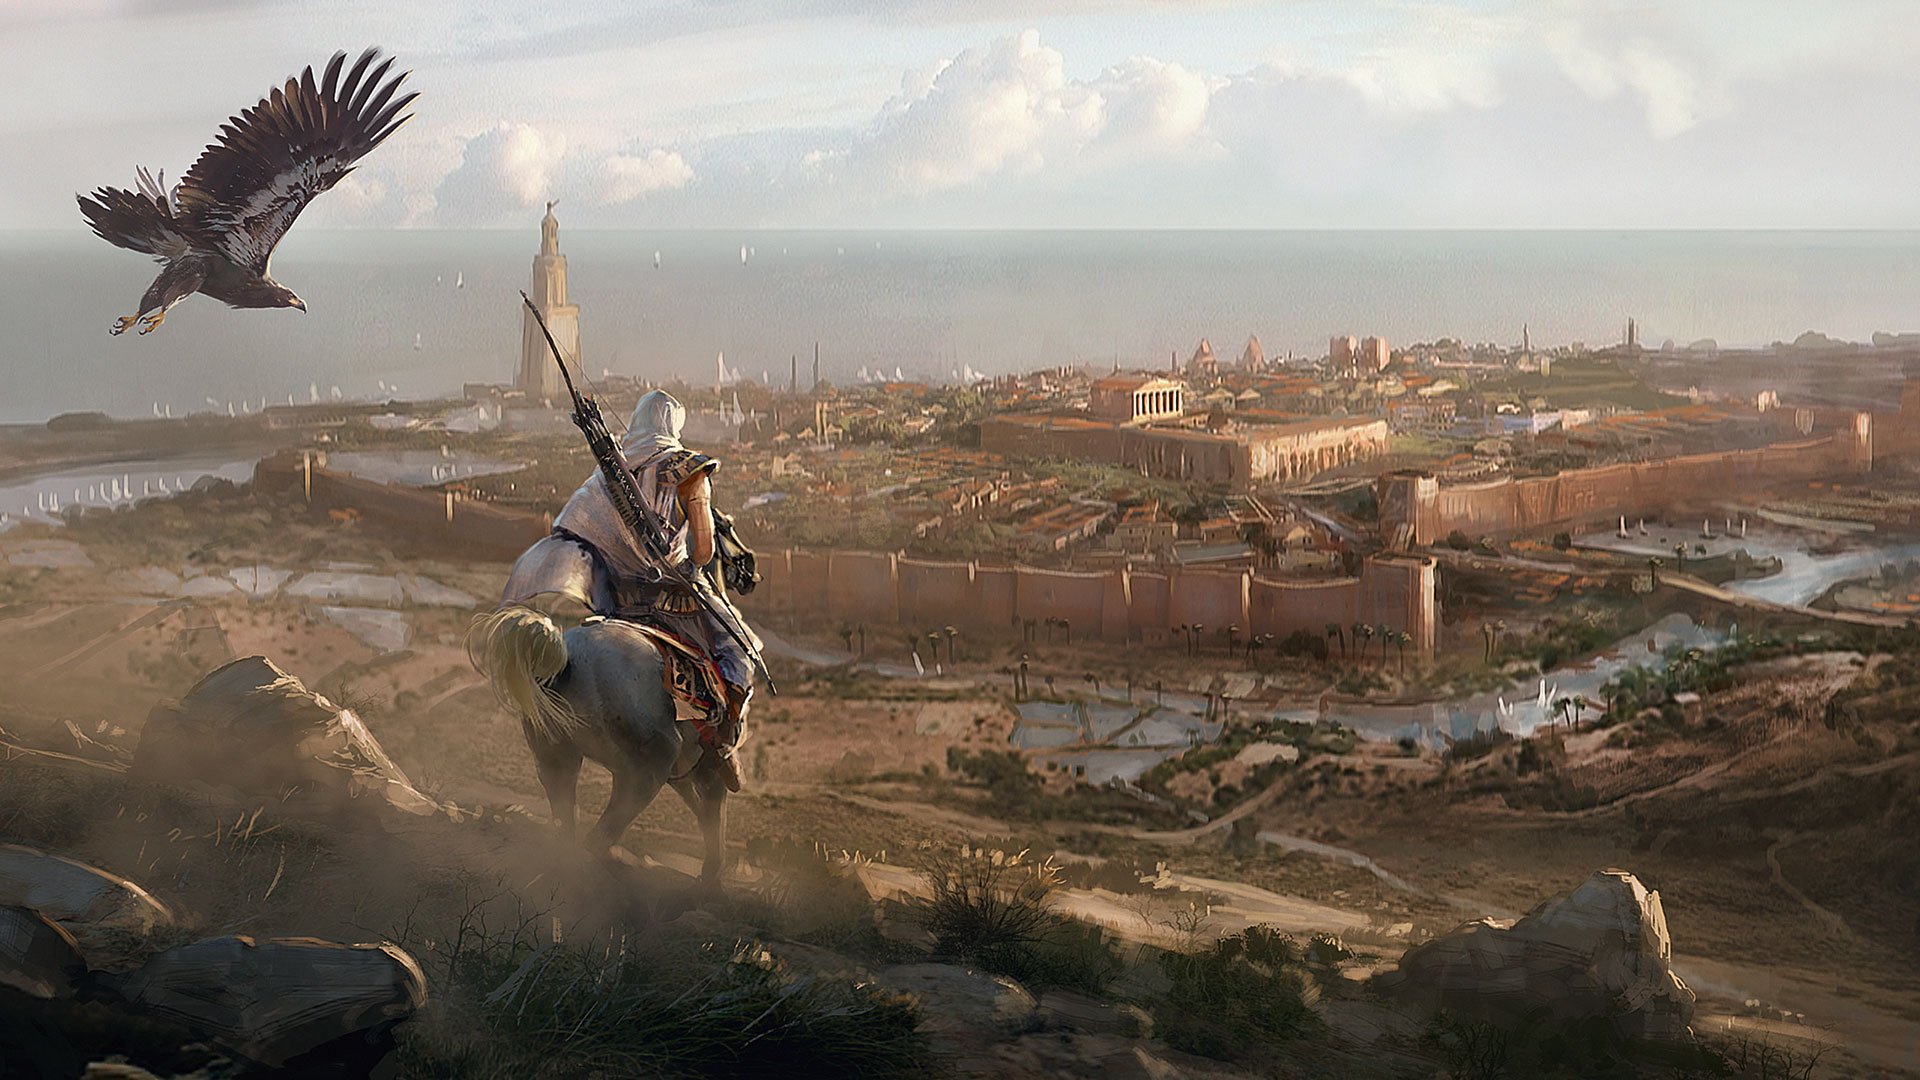 Assassin's Creed Mirage: Release date, trailers, setting